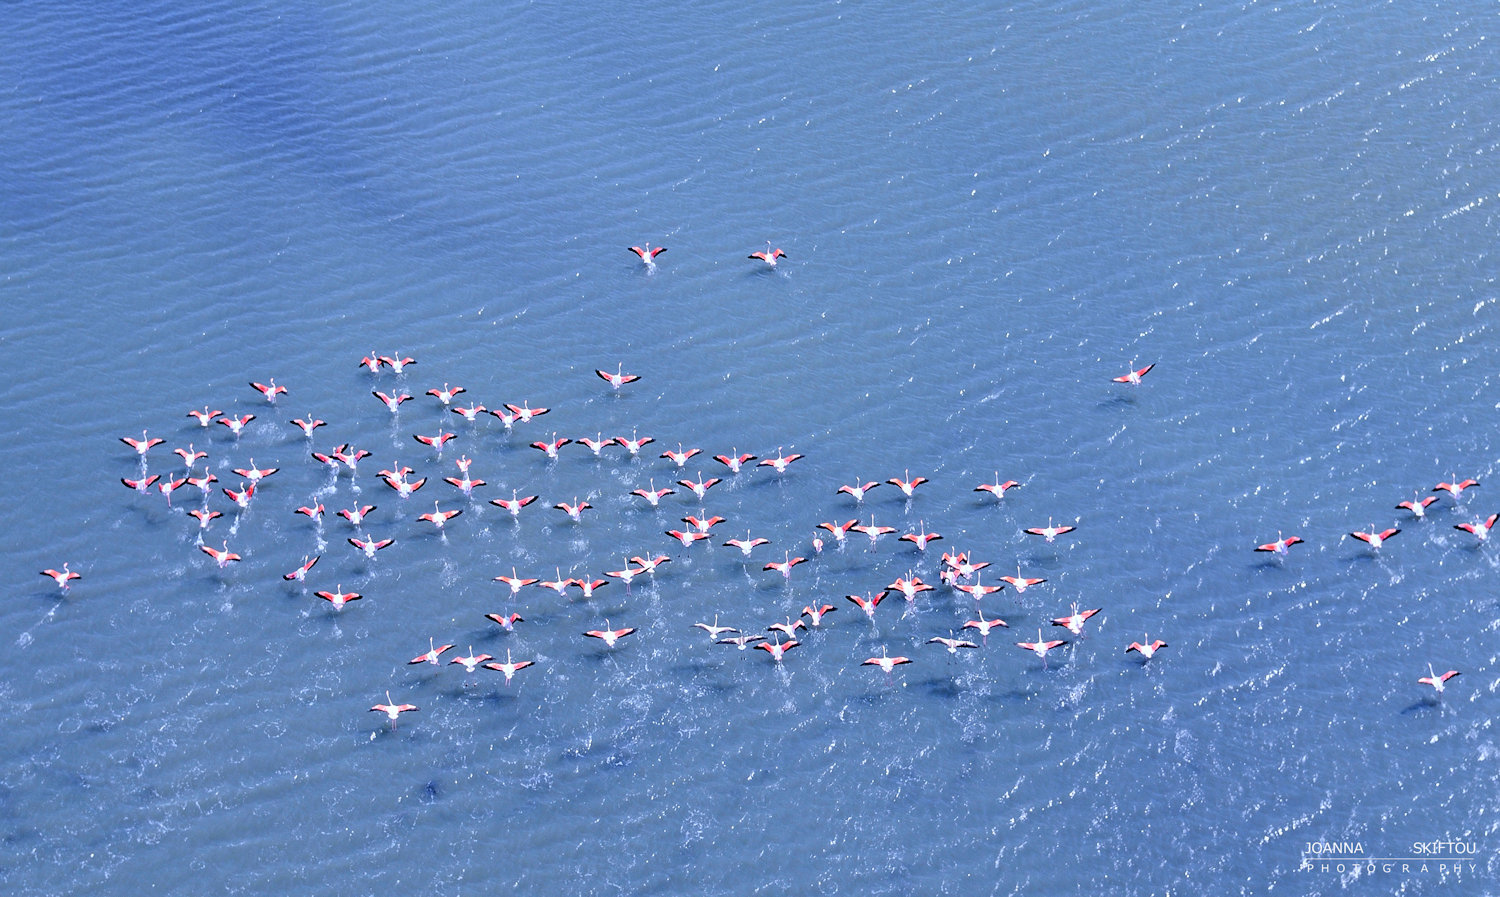 Aerial photography by Joanna Skiftou, Mitilini, Greece